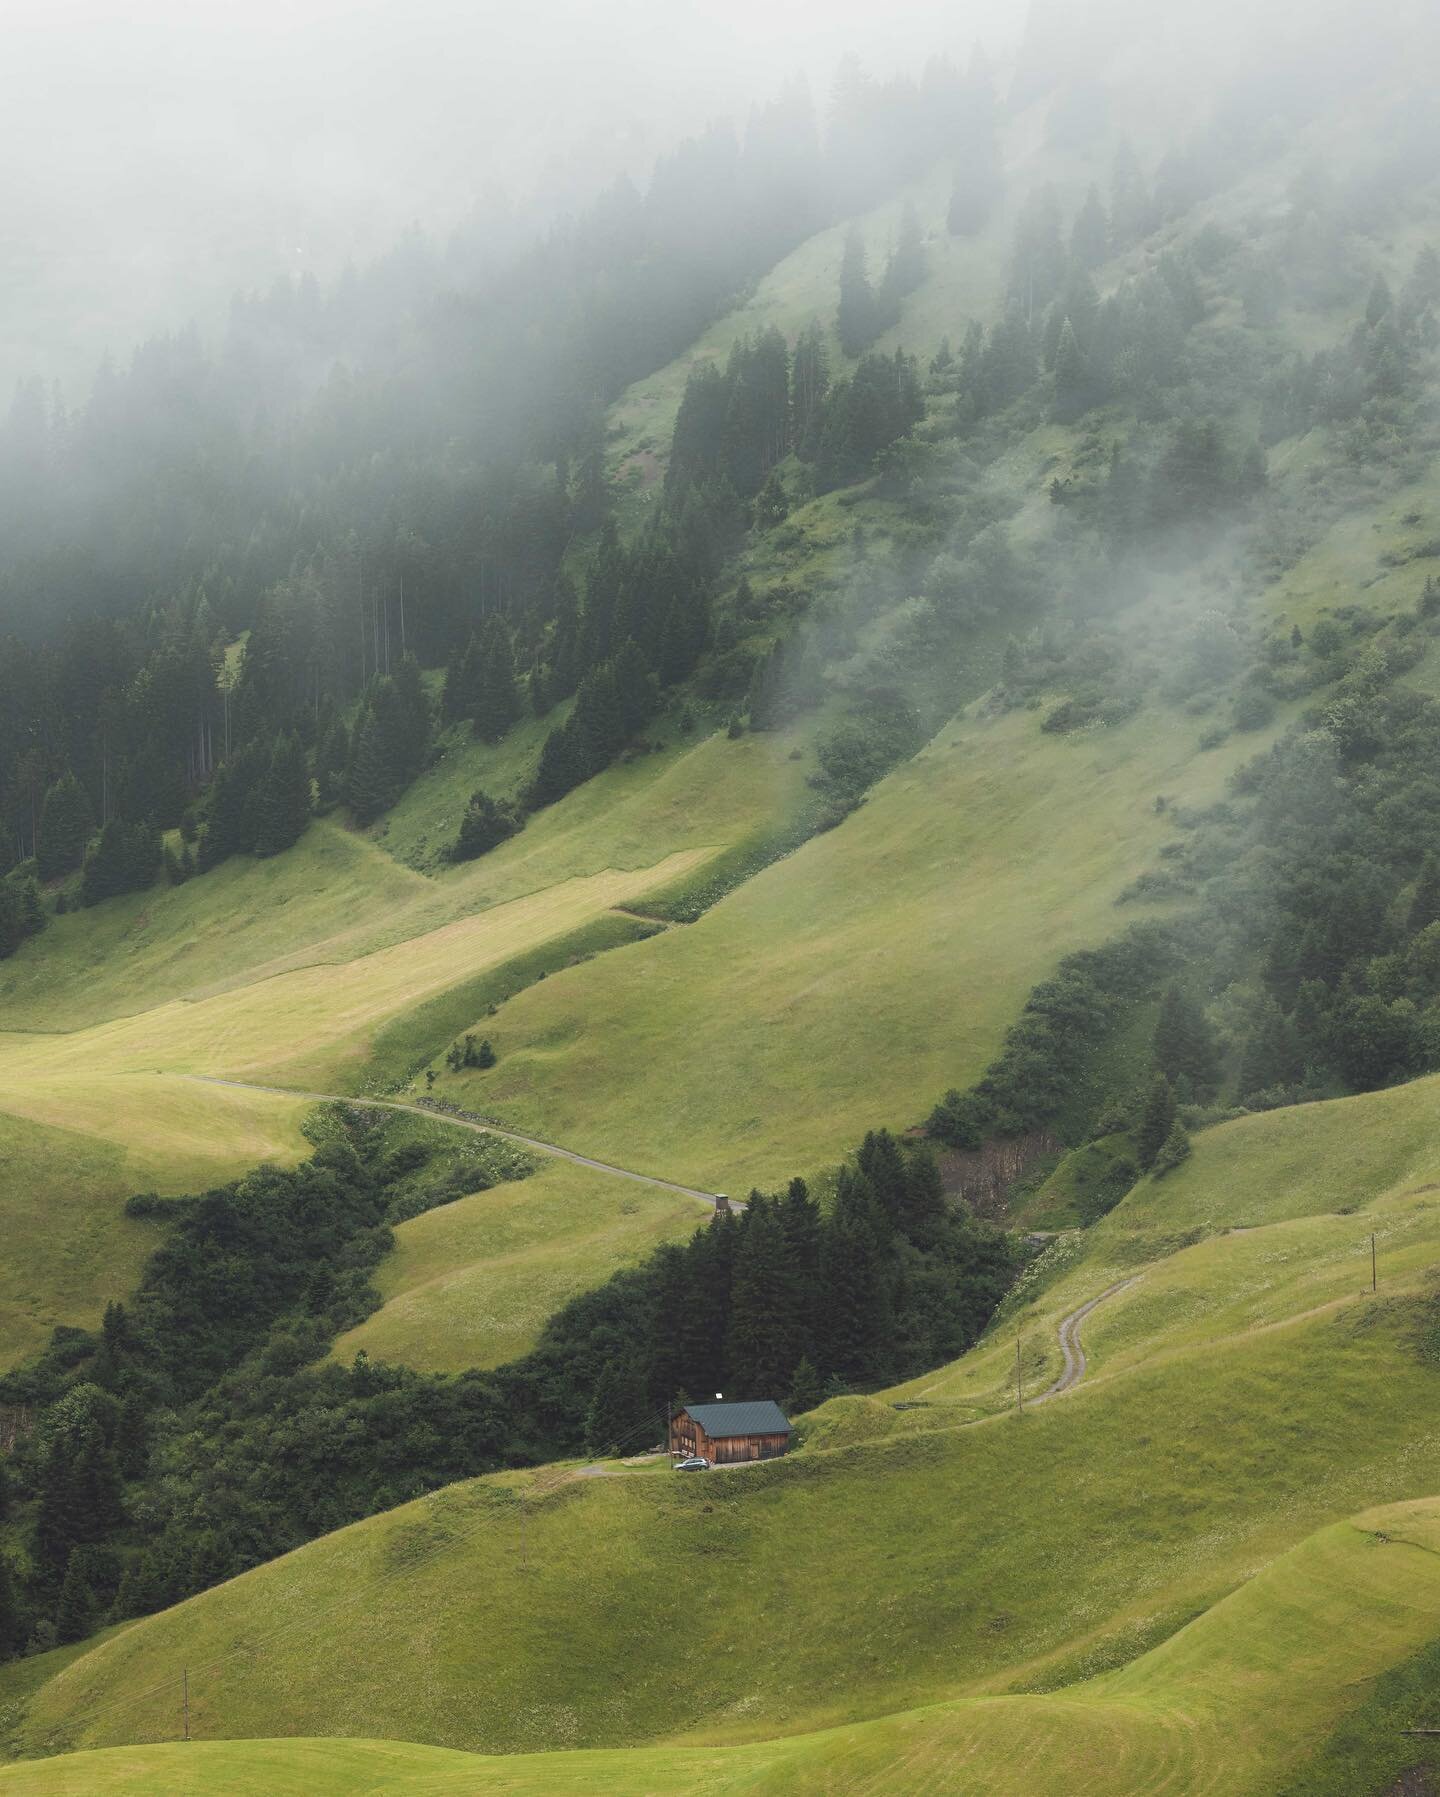 Hiking through the clouds in Austria ☁️ 

Our latest article from our recent trip to Lech, Austria is live on our website! 🇦🇹 Let us know what you think in the comments!

Have you visited our website yet?

If not it&rsquo;s BrockandBetty.co.uk 💻 
